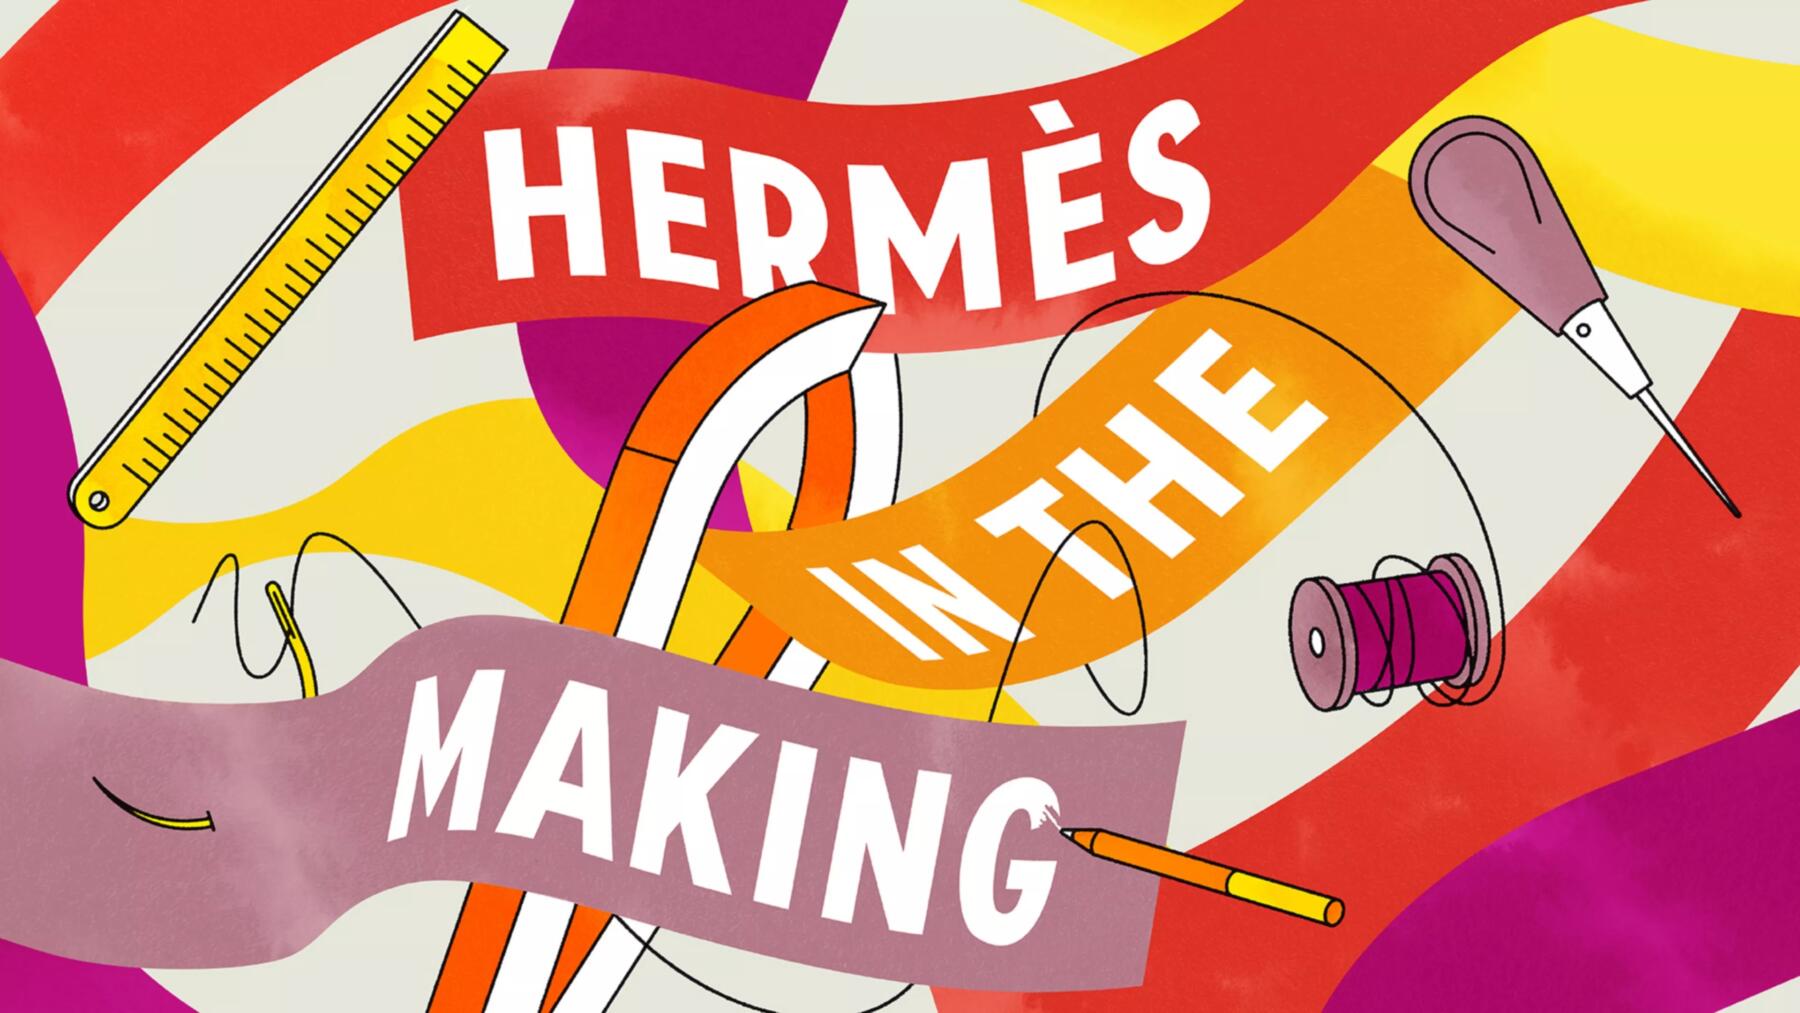 Hermes in the Making